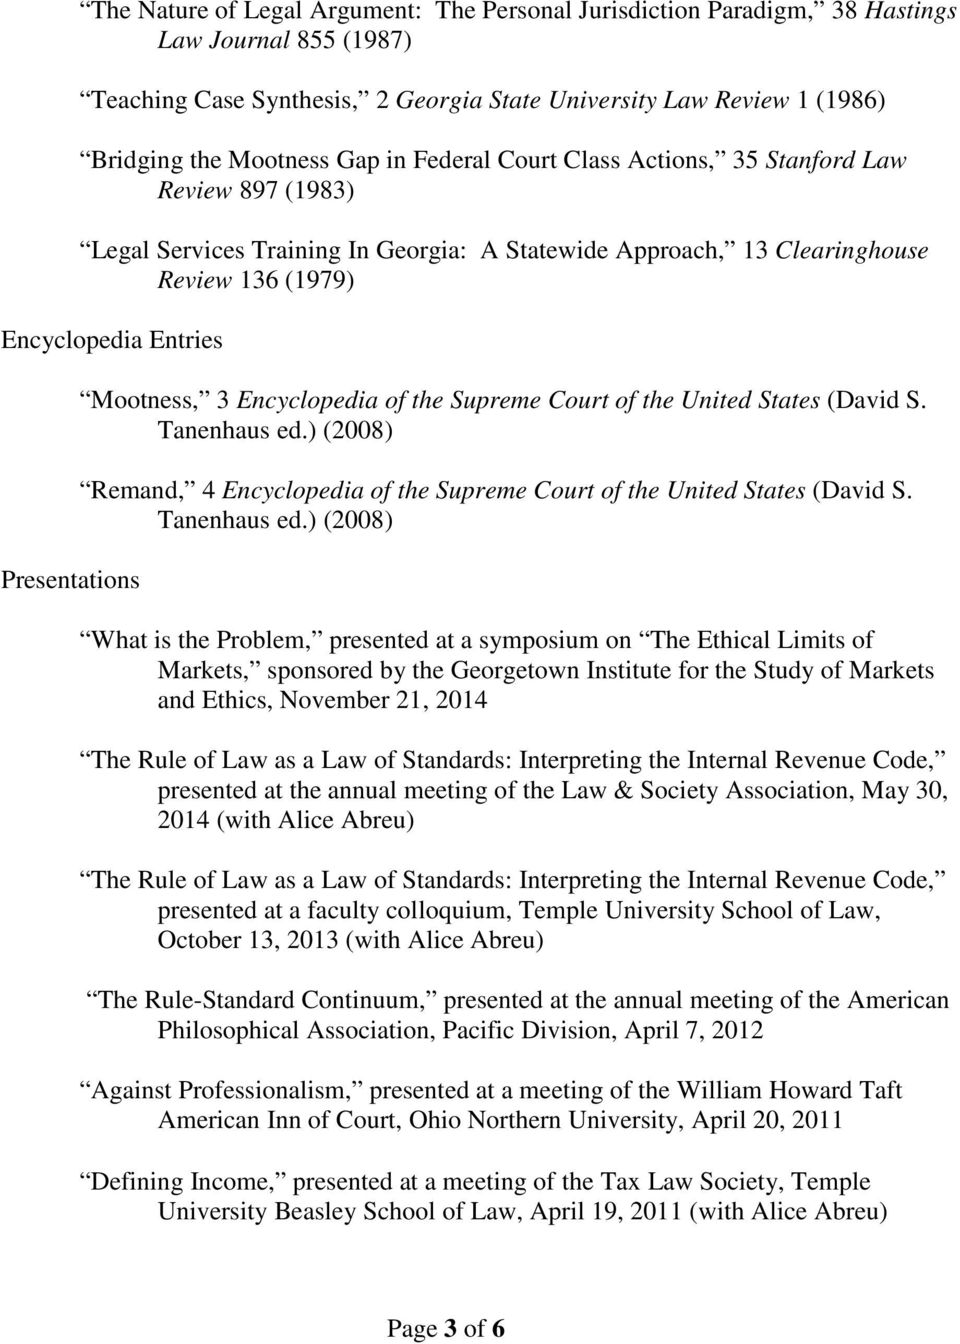 Mootness, 3 Encyclopedia of the Supreme Court of the United States (David S. Tanenhaus ed.